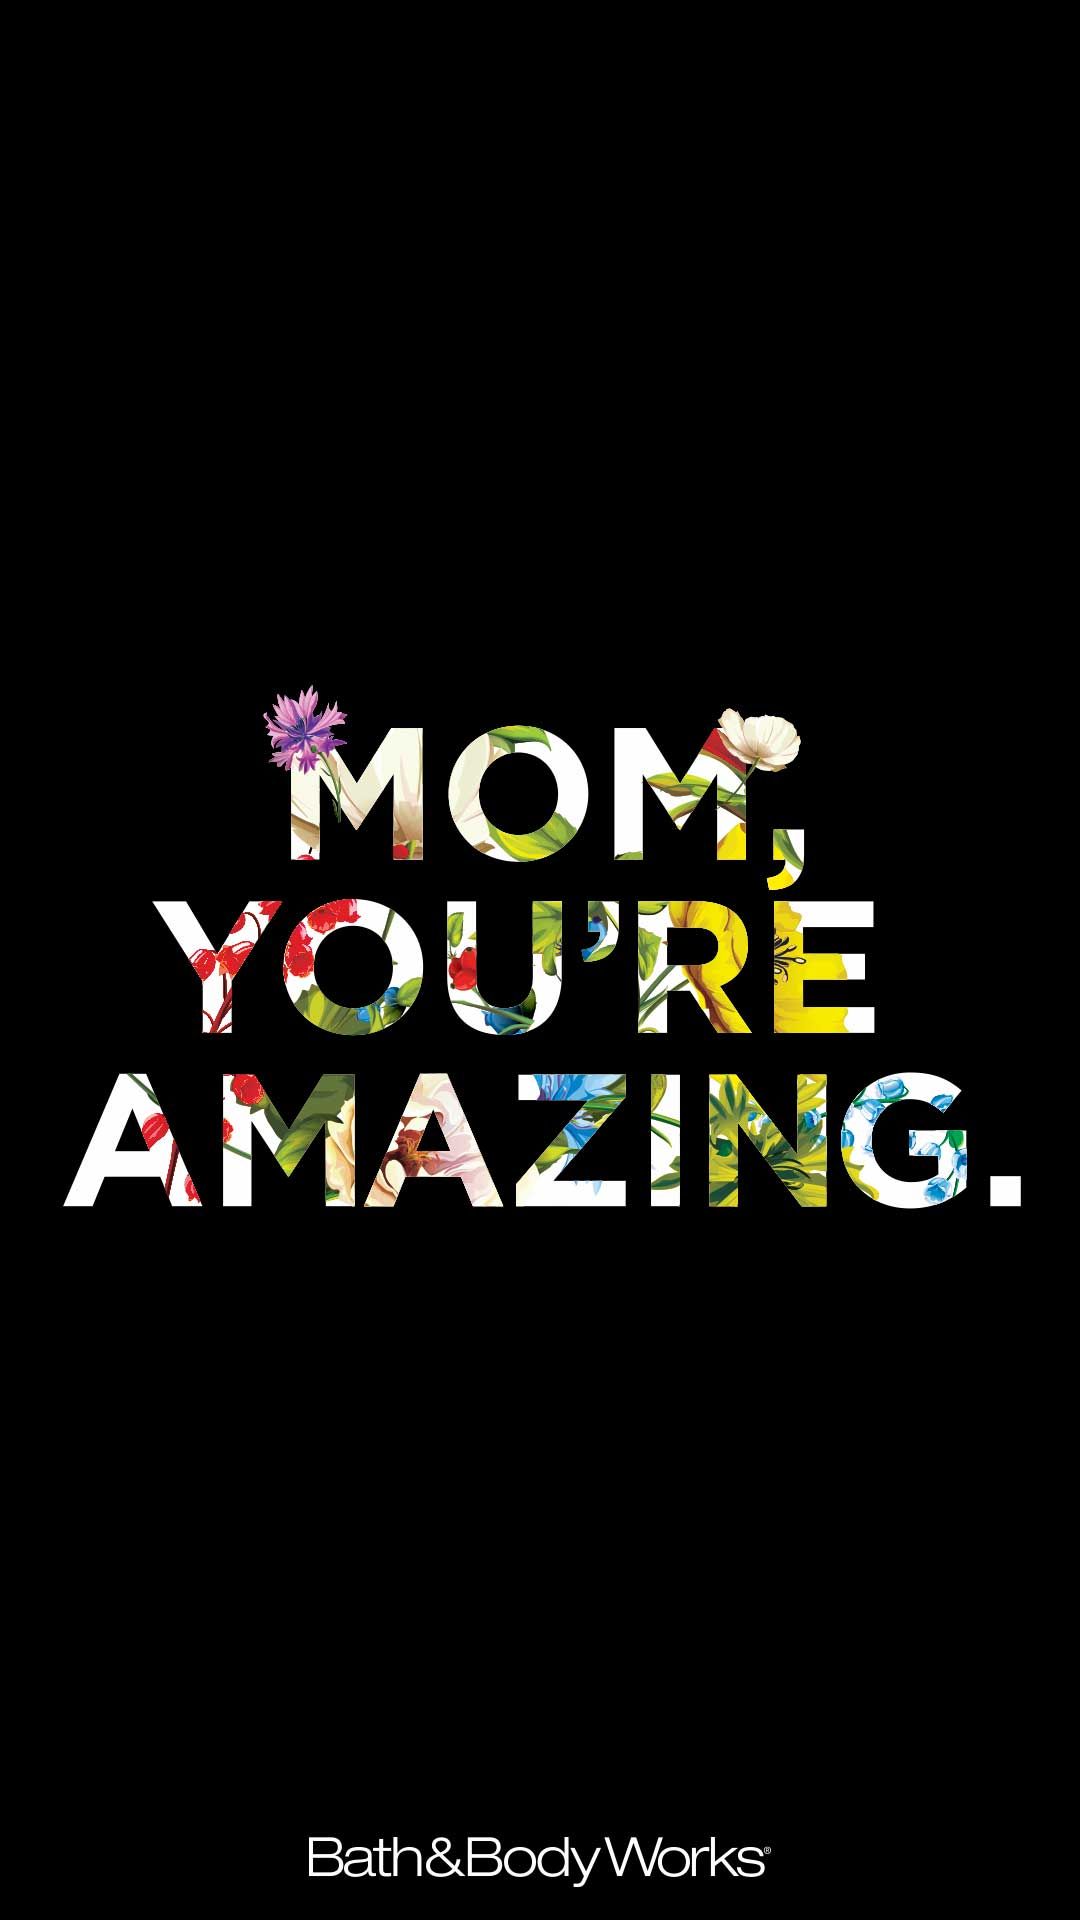 Mom Youre Amazing Wallpaper Words wallpaper Youre awesome 1080x1920